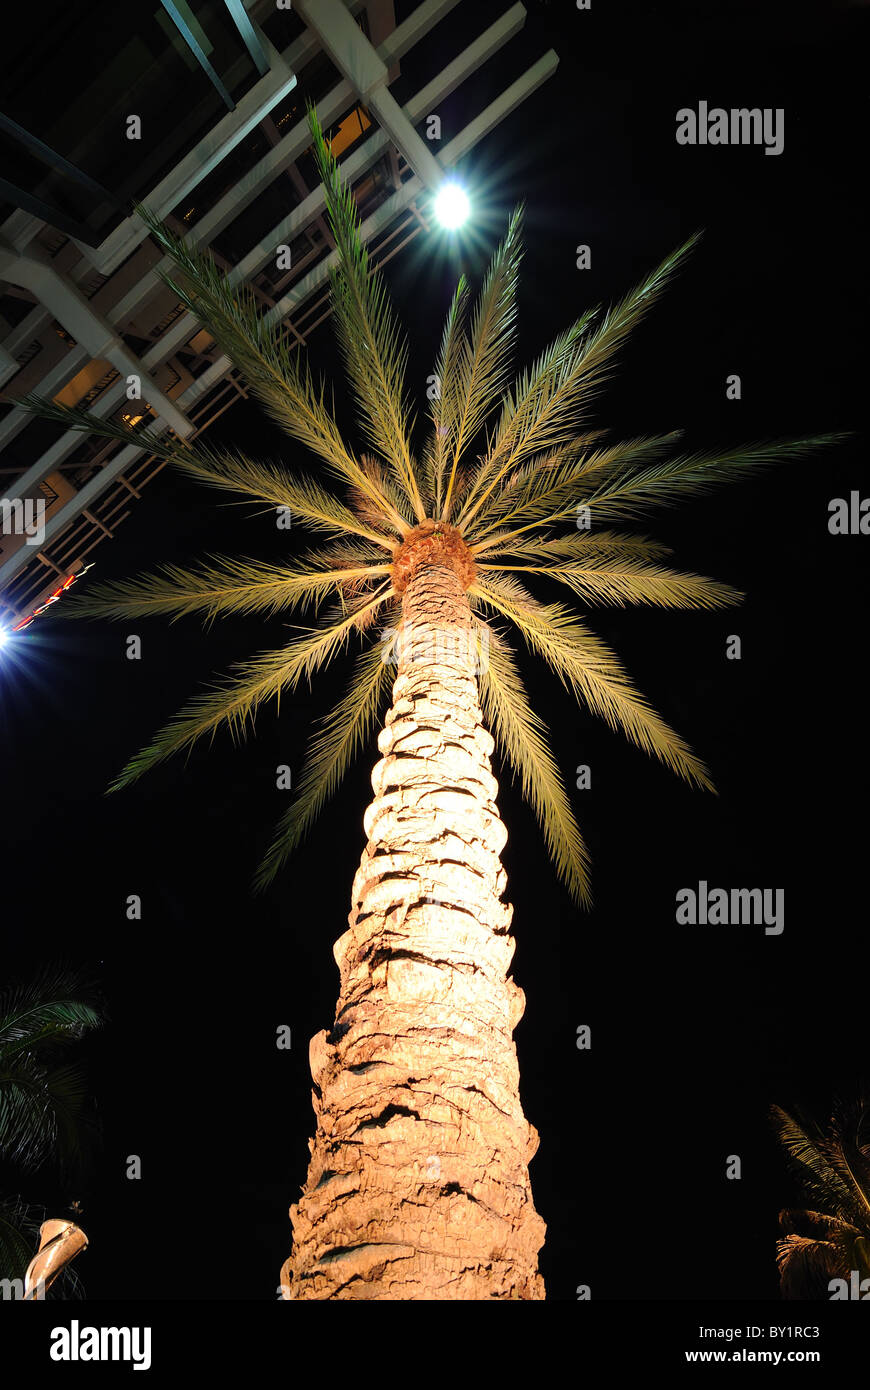 Palm tree illuminated at night with a hotel awning in the background. Stock Photo